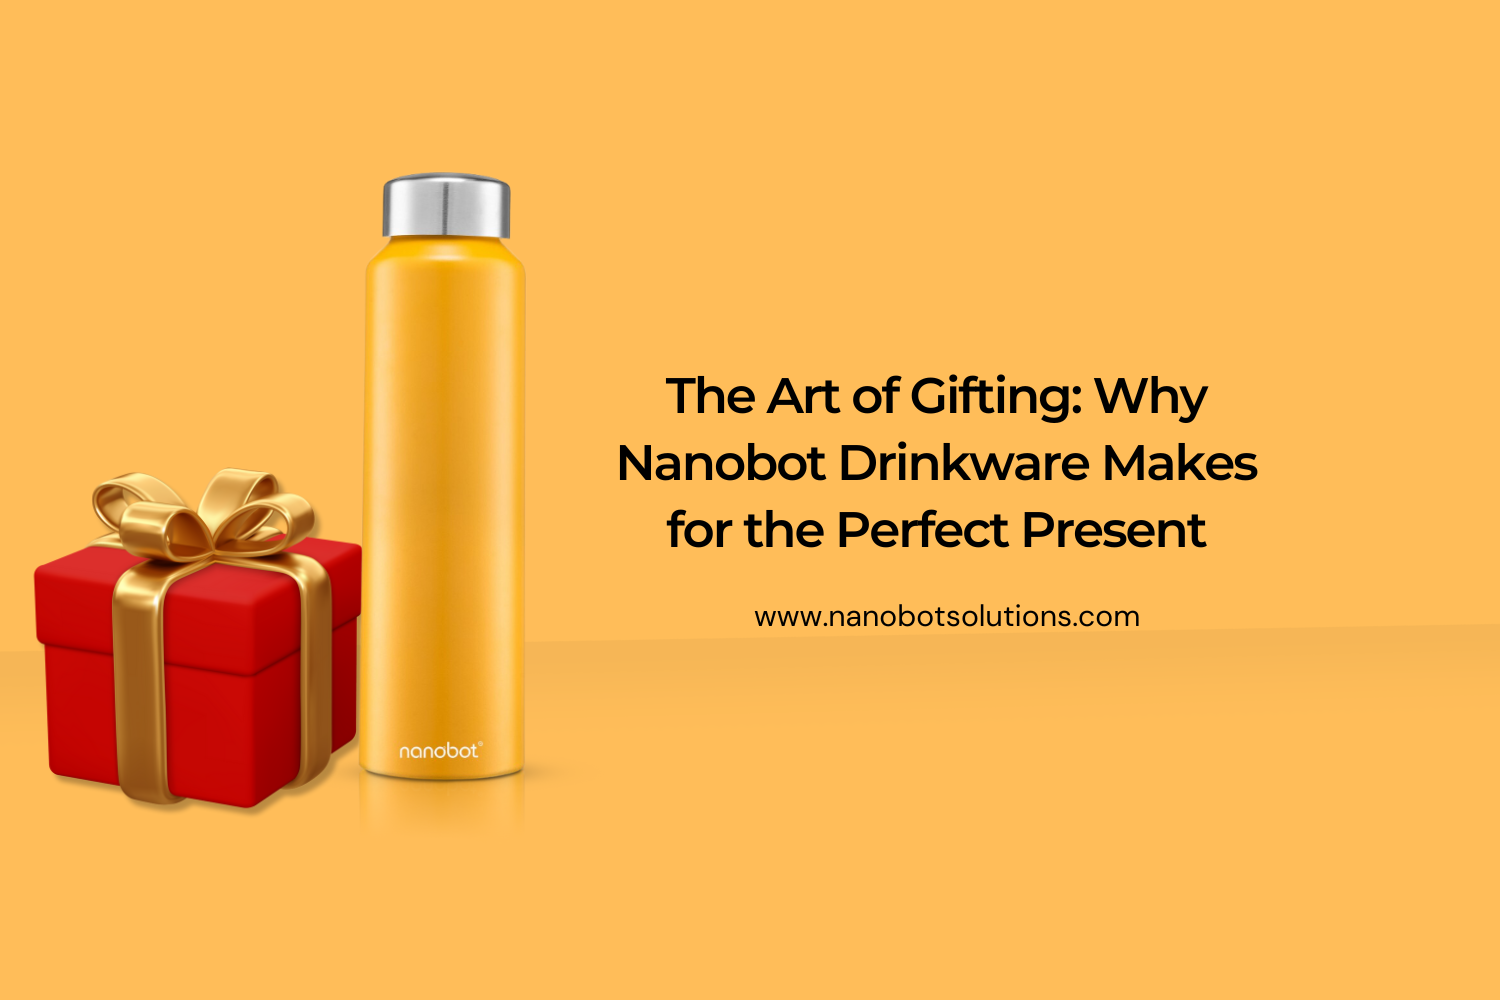 The Art of Gifting Why Nanobot Drinkware Makes for the Perfect Present | Nanobot